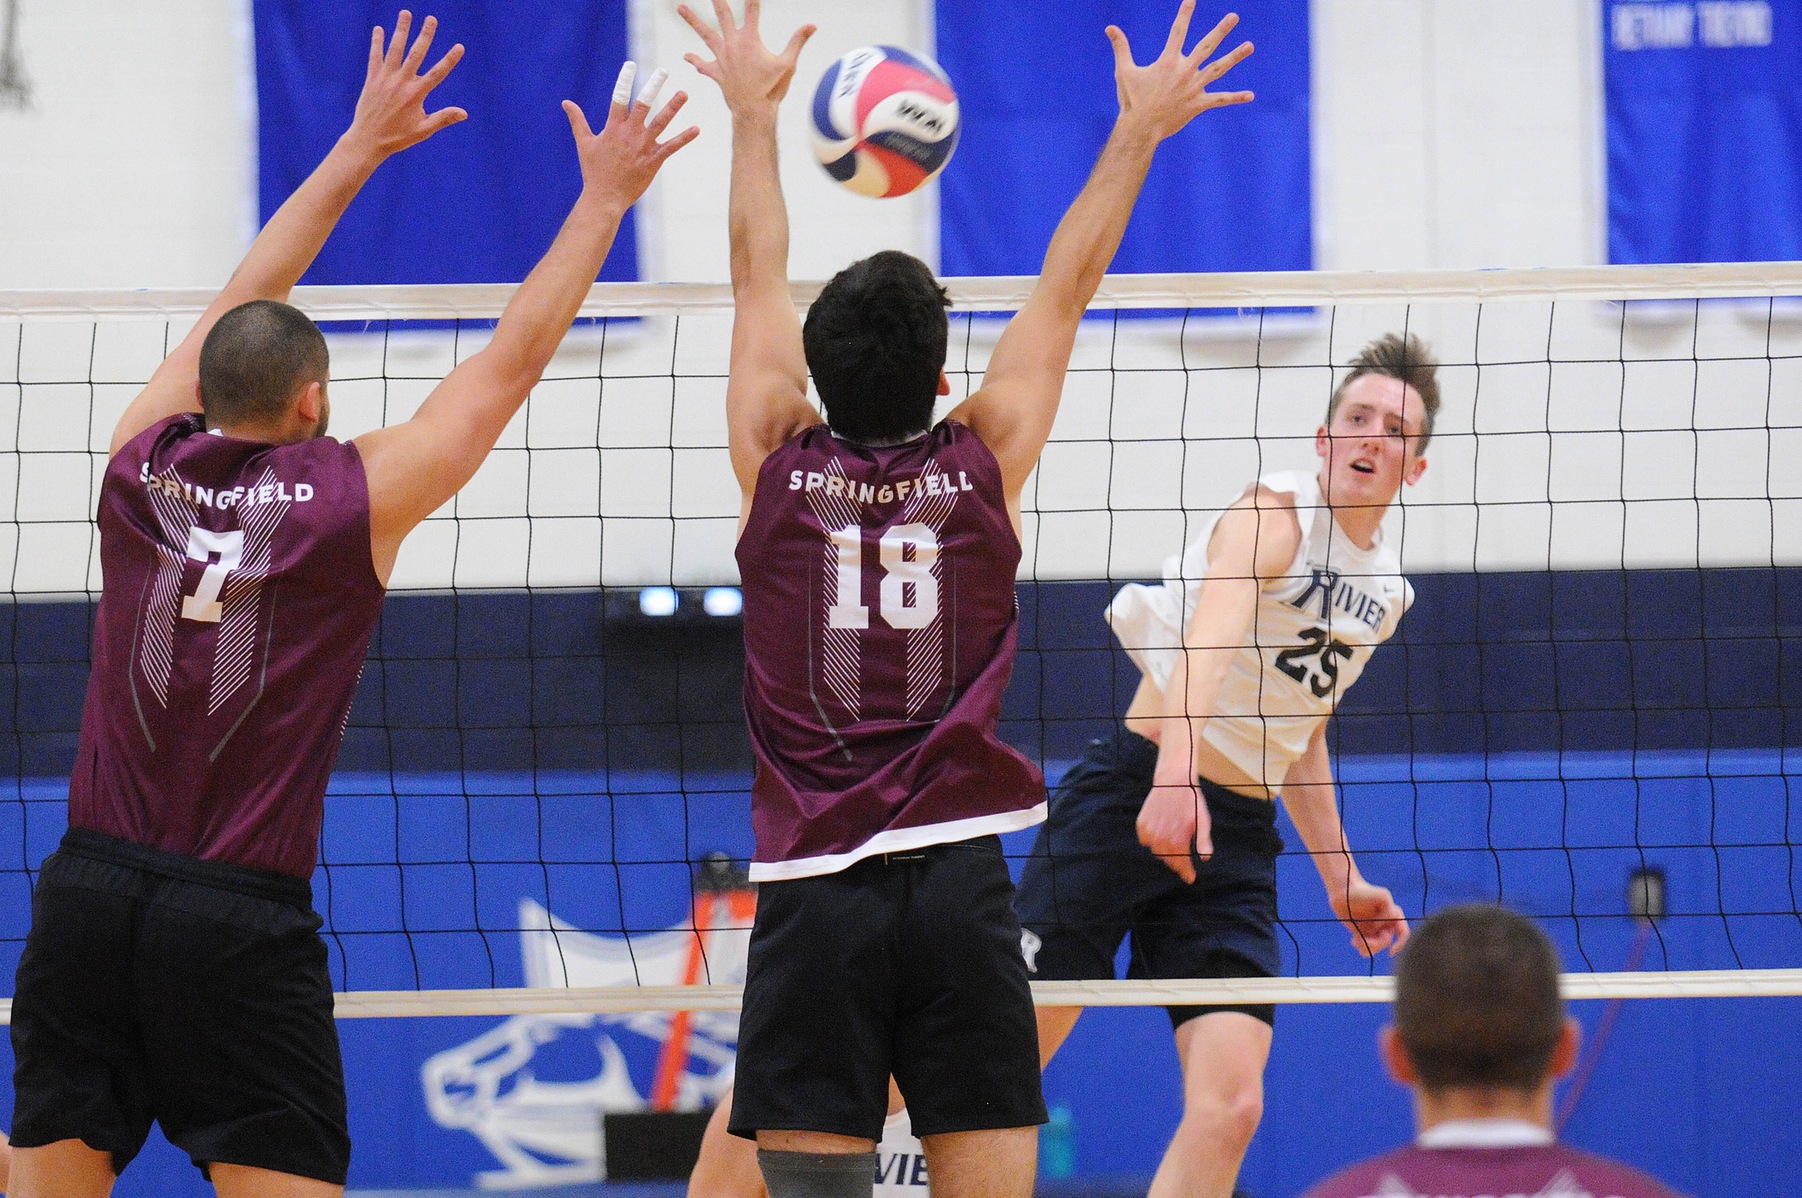 Men's Volleyball: Rivier swept at home by #1 Springfield